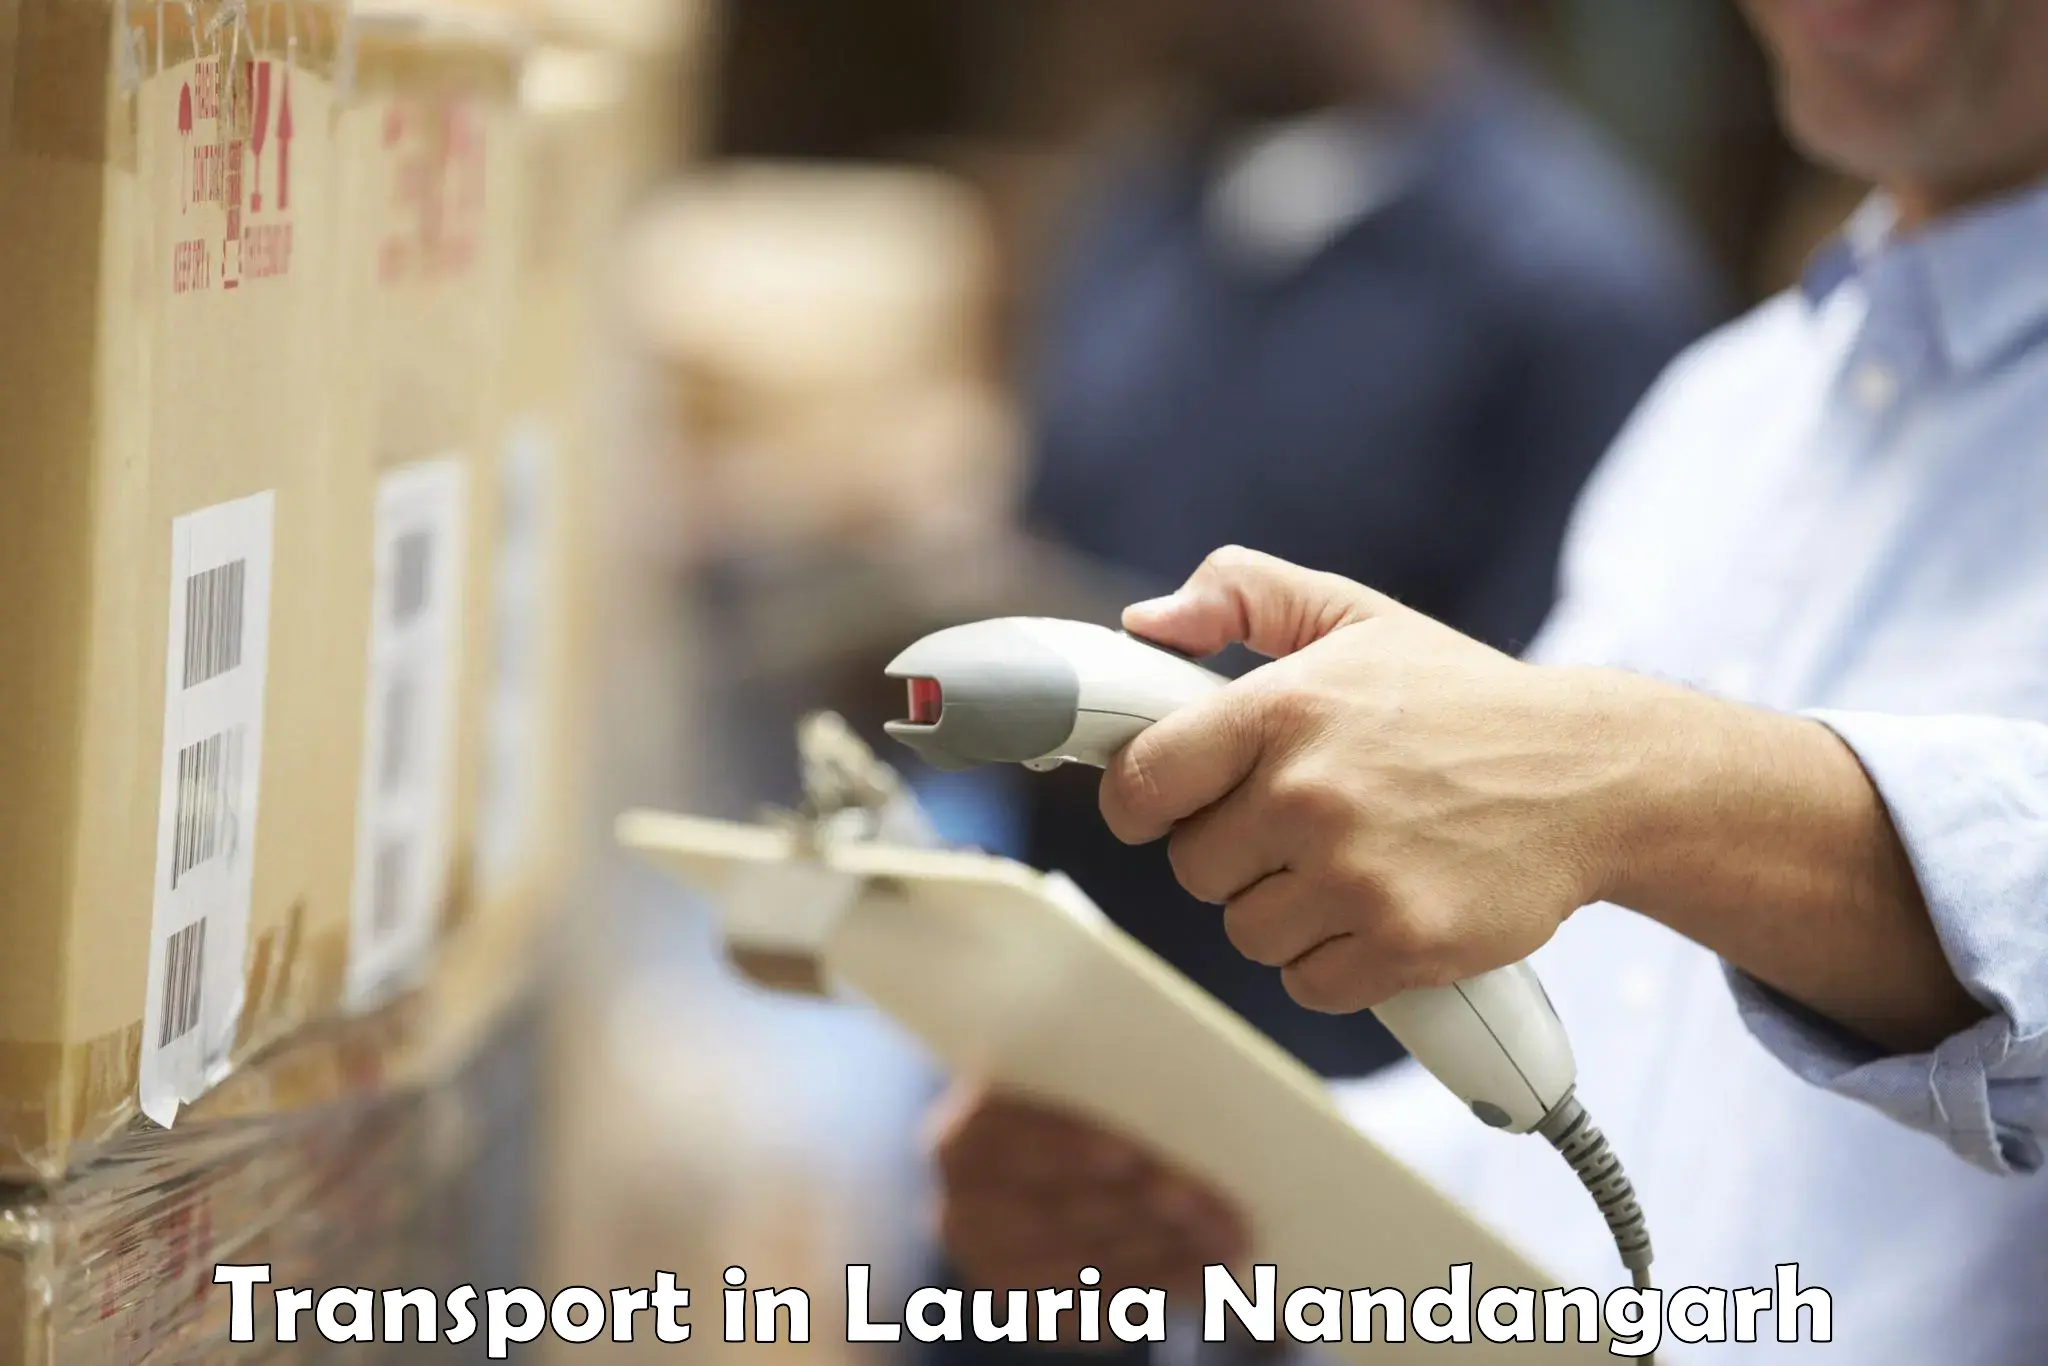 Nationwide transport services in Lauria Nandangarh